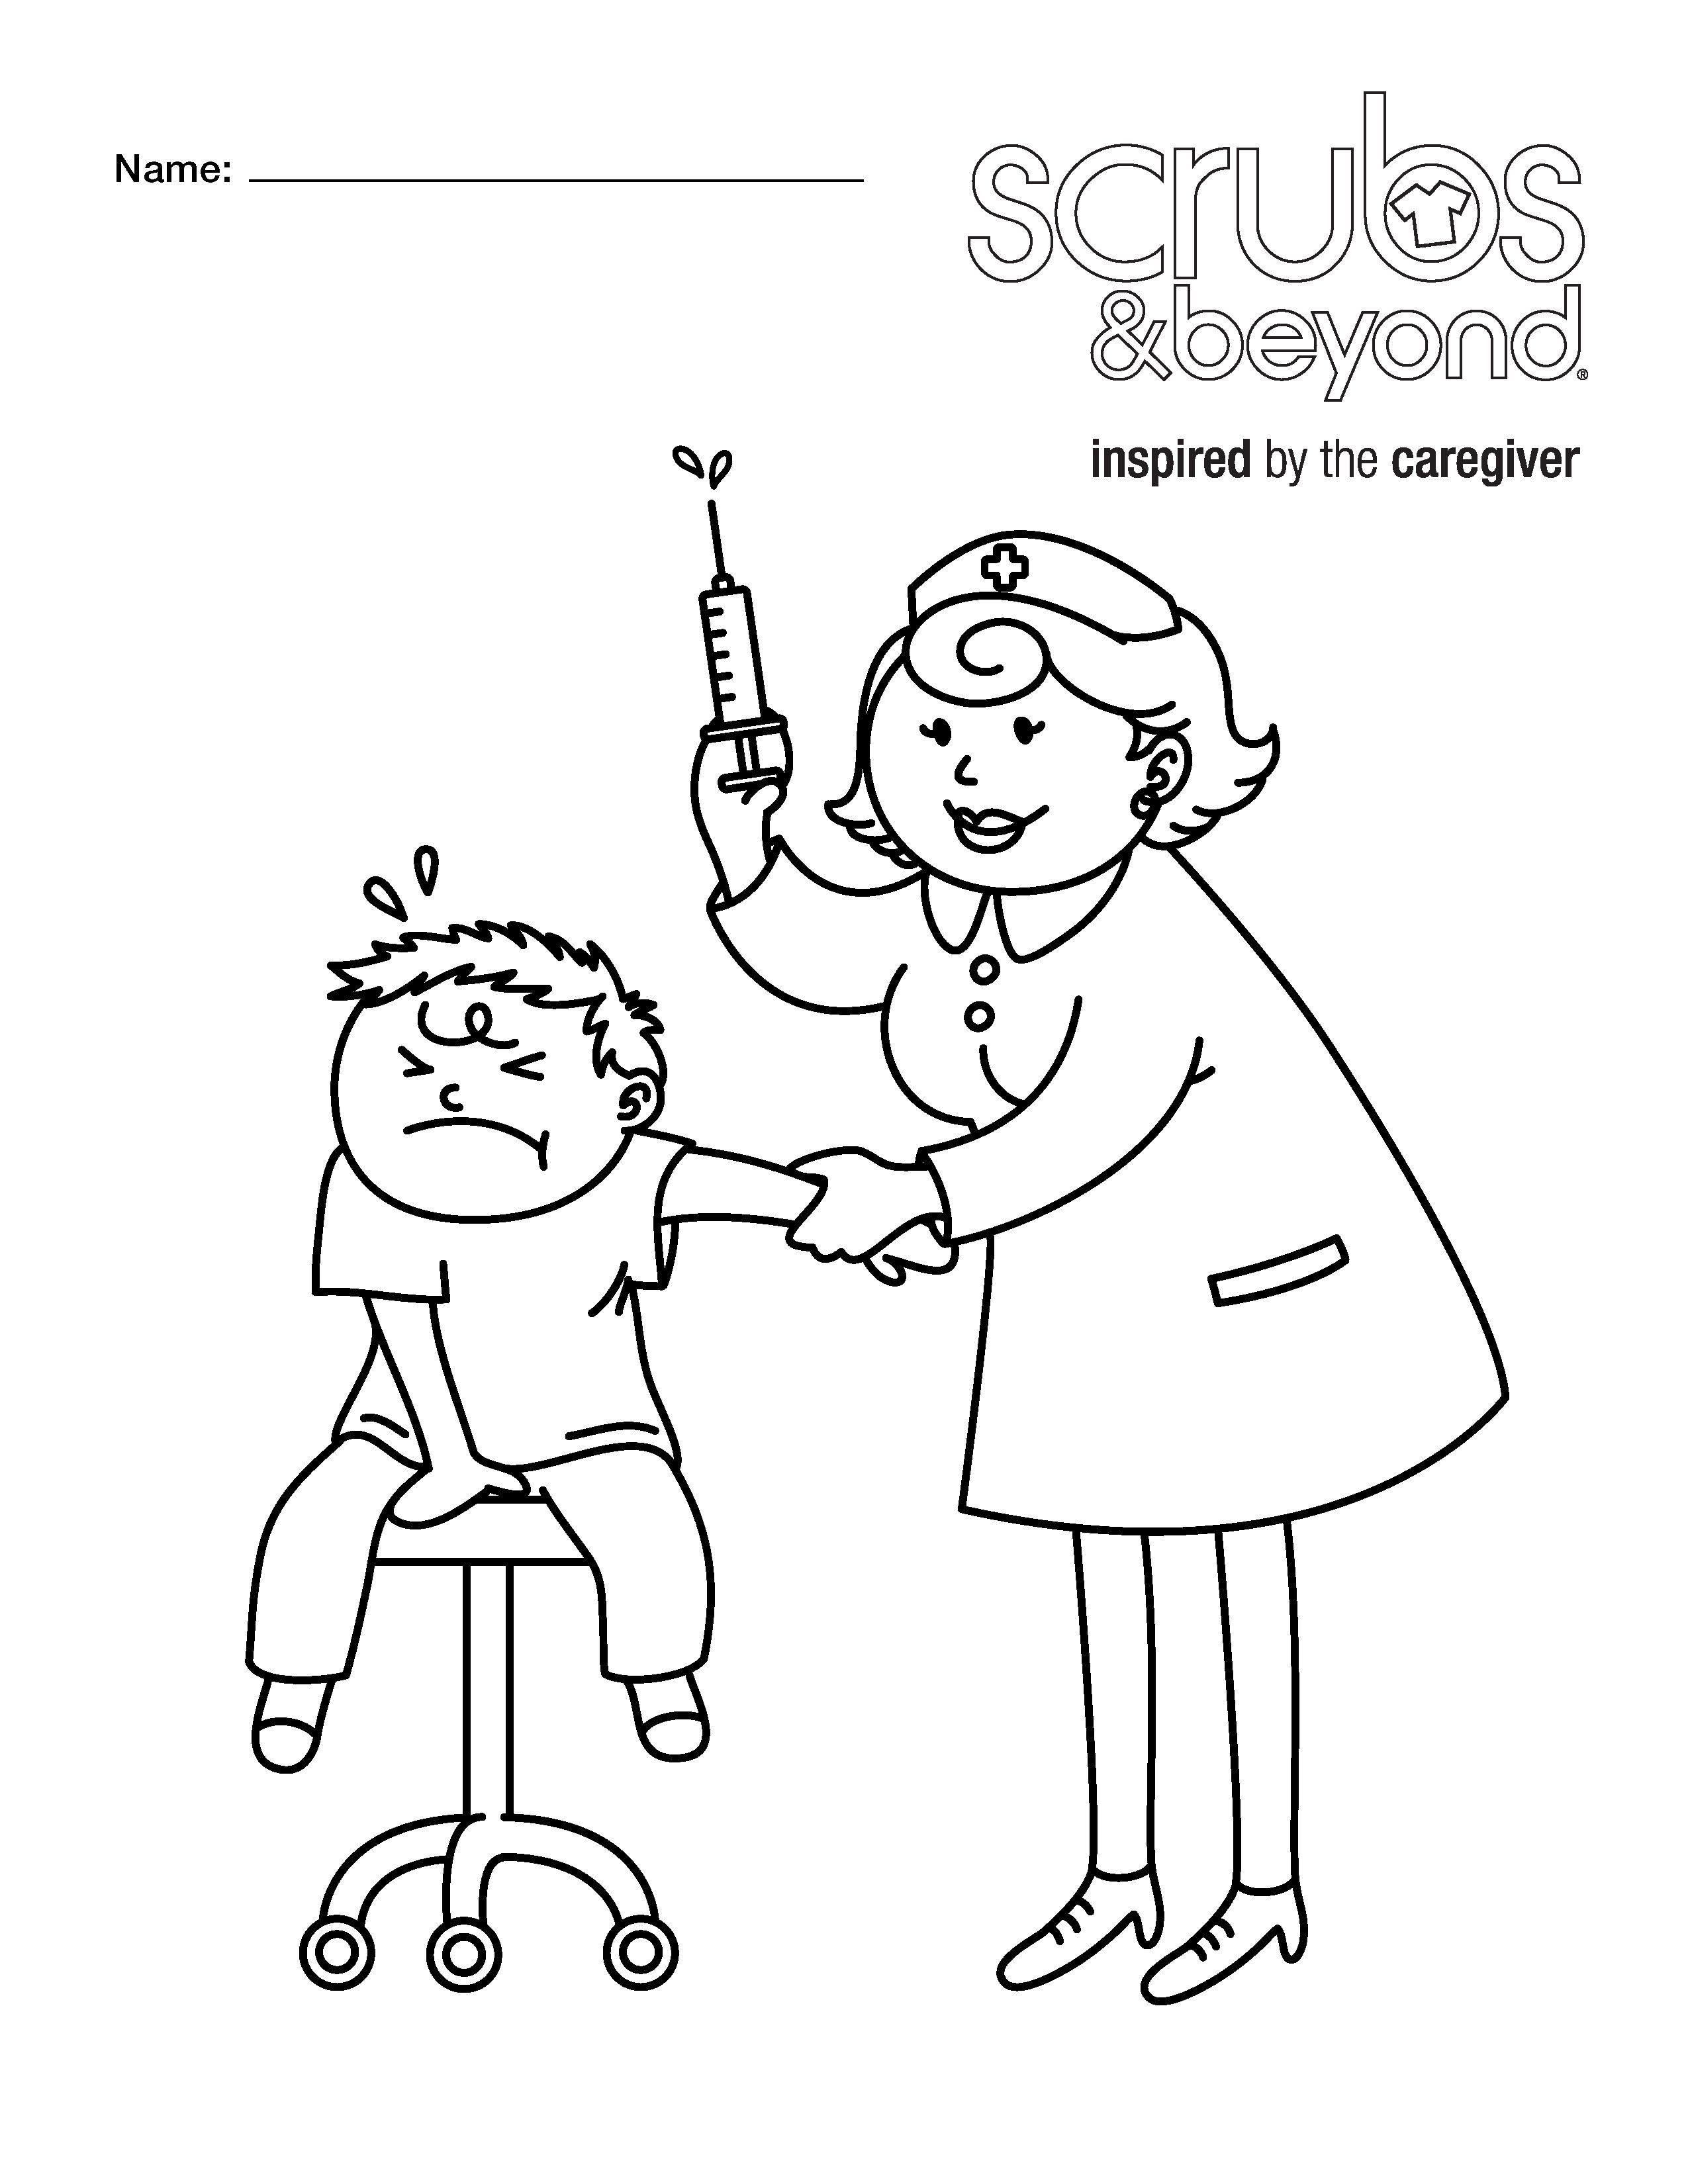 Print this coloring page